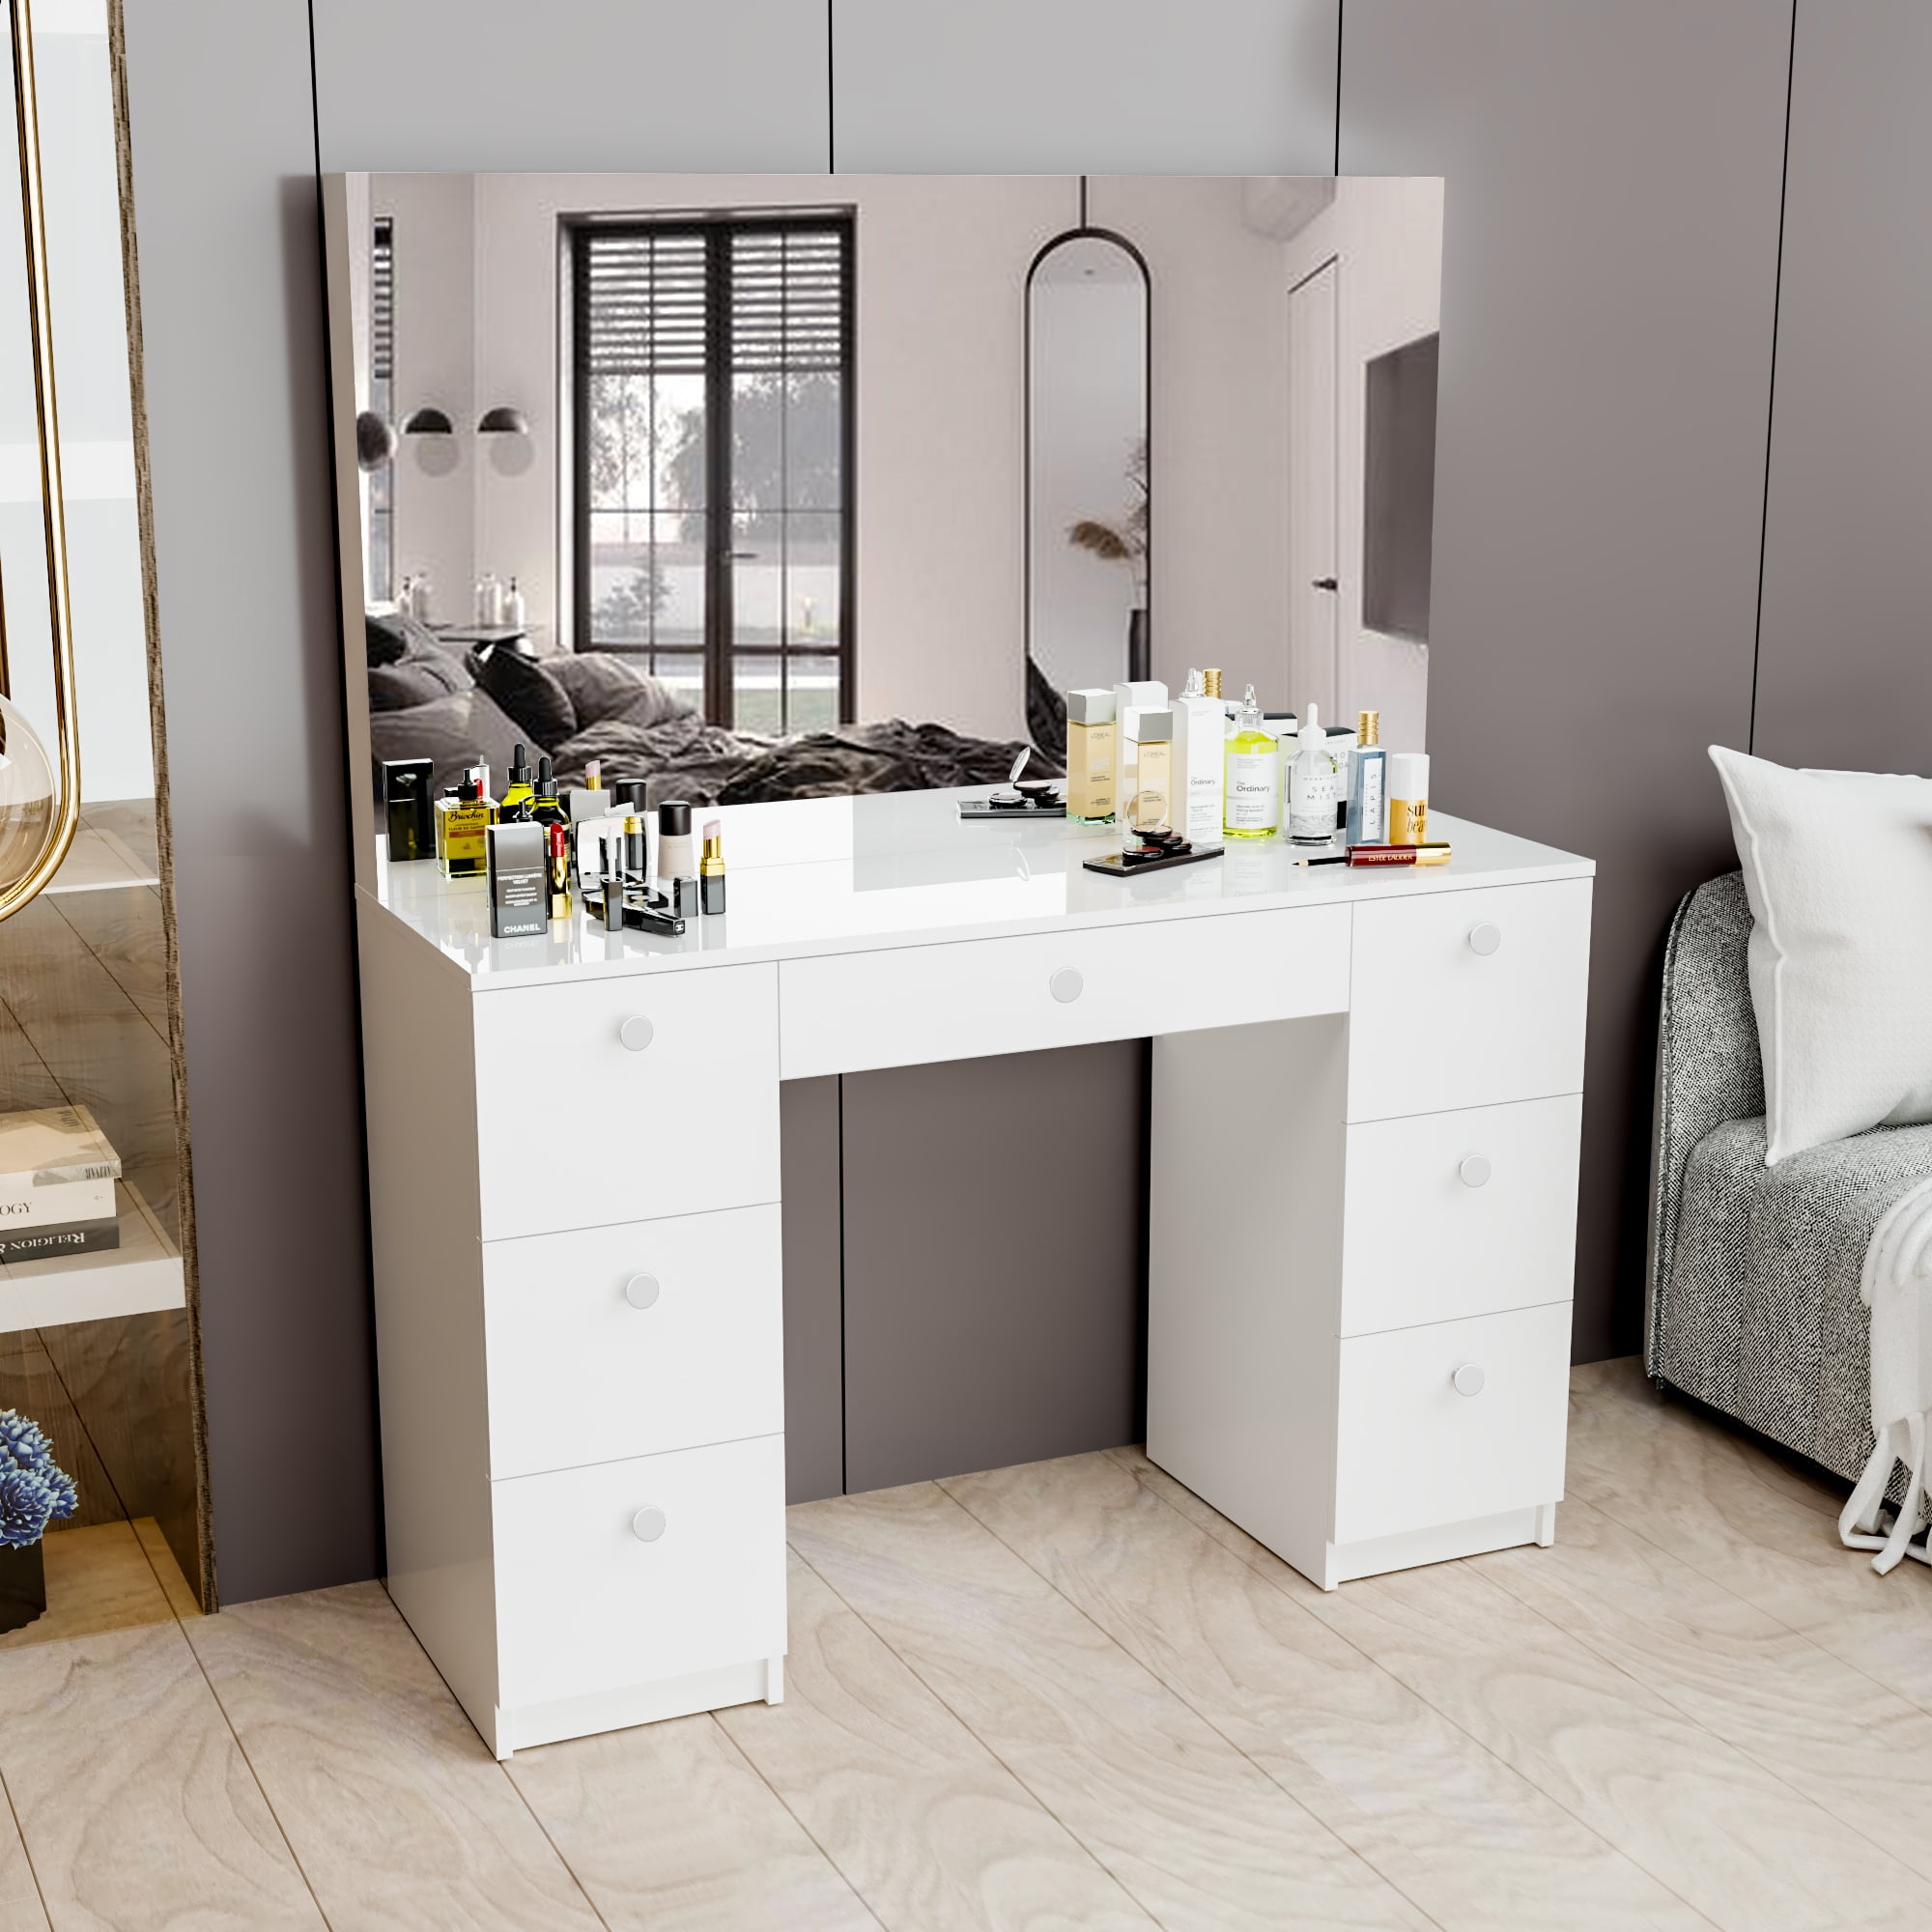 Boahaus Artemisia Modern Vanity Table with Mirror, White Finish, for Bedroom